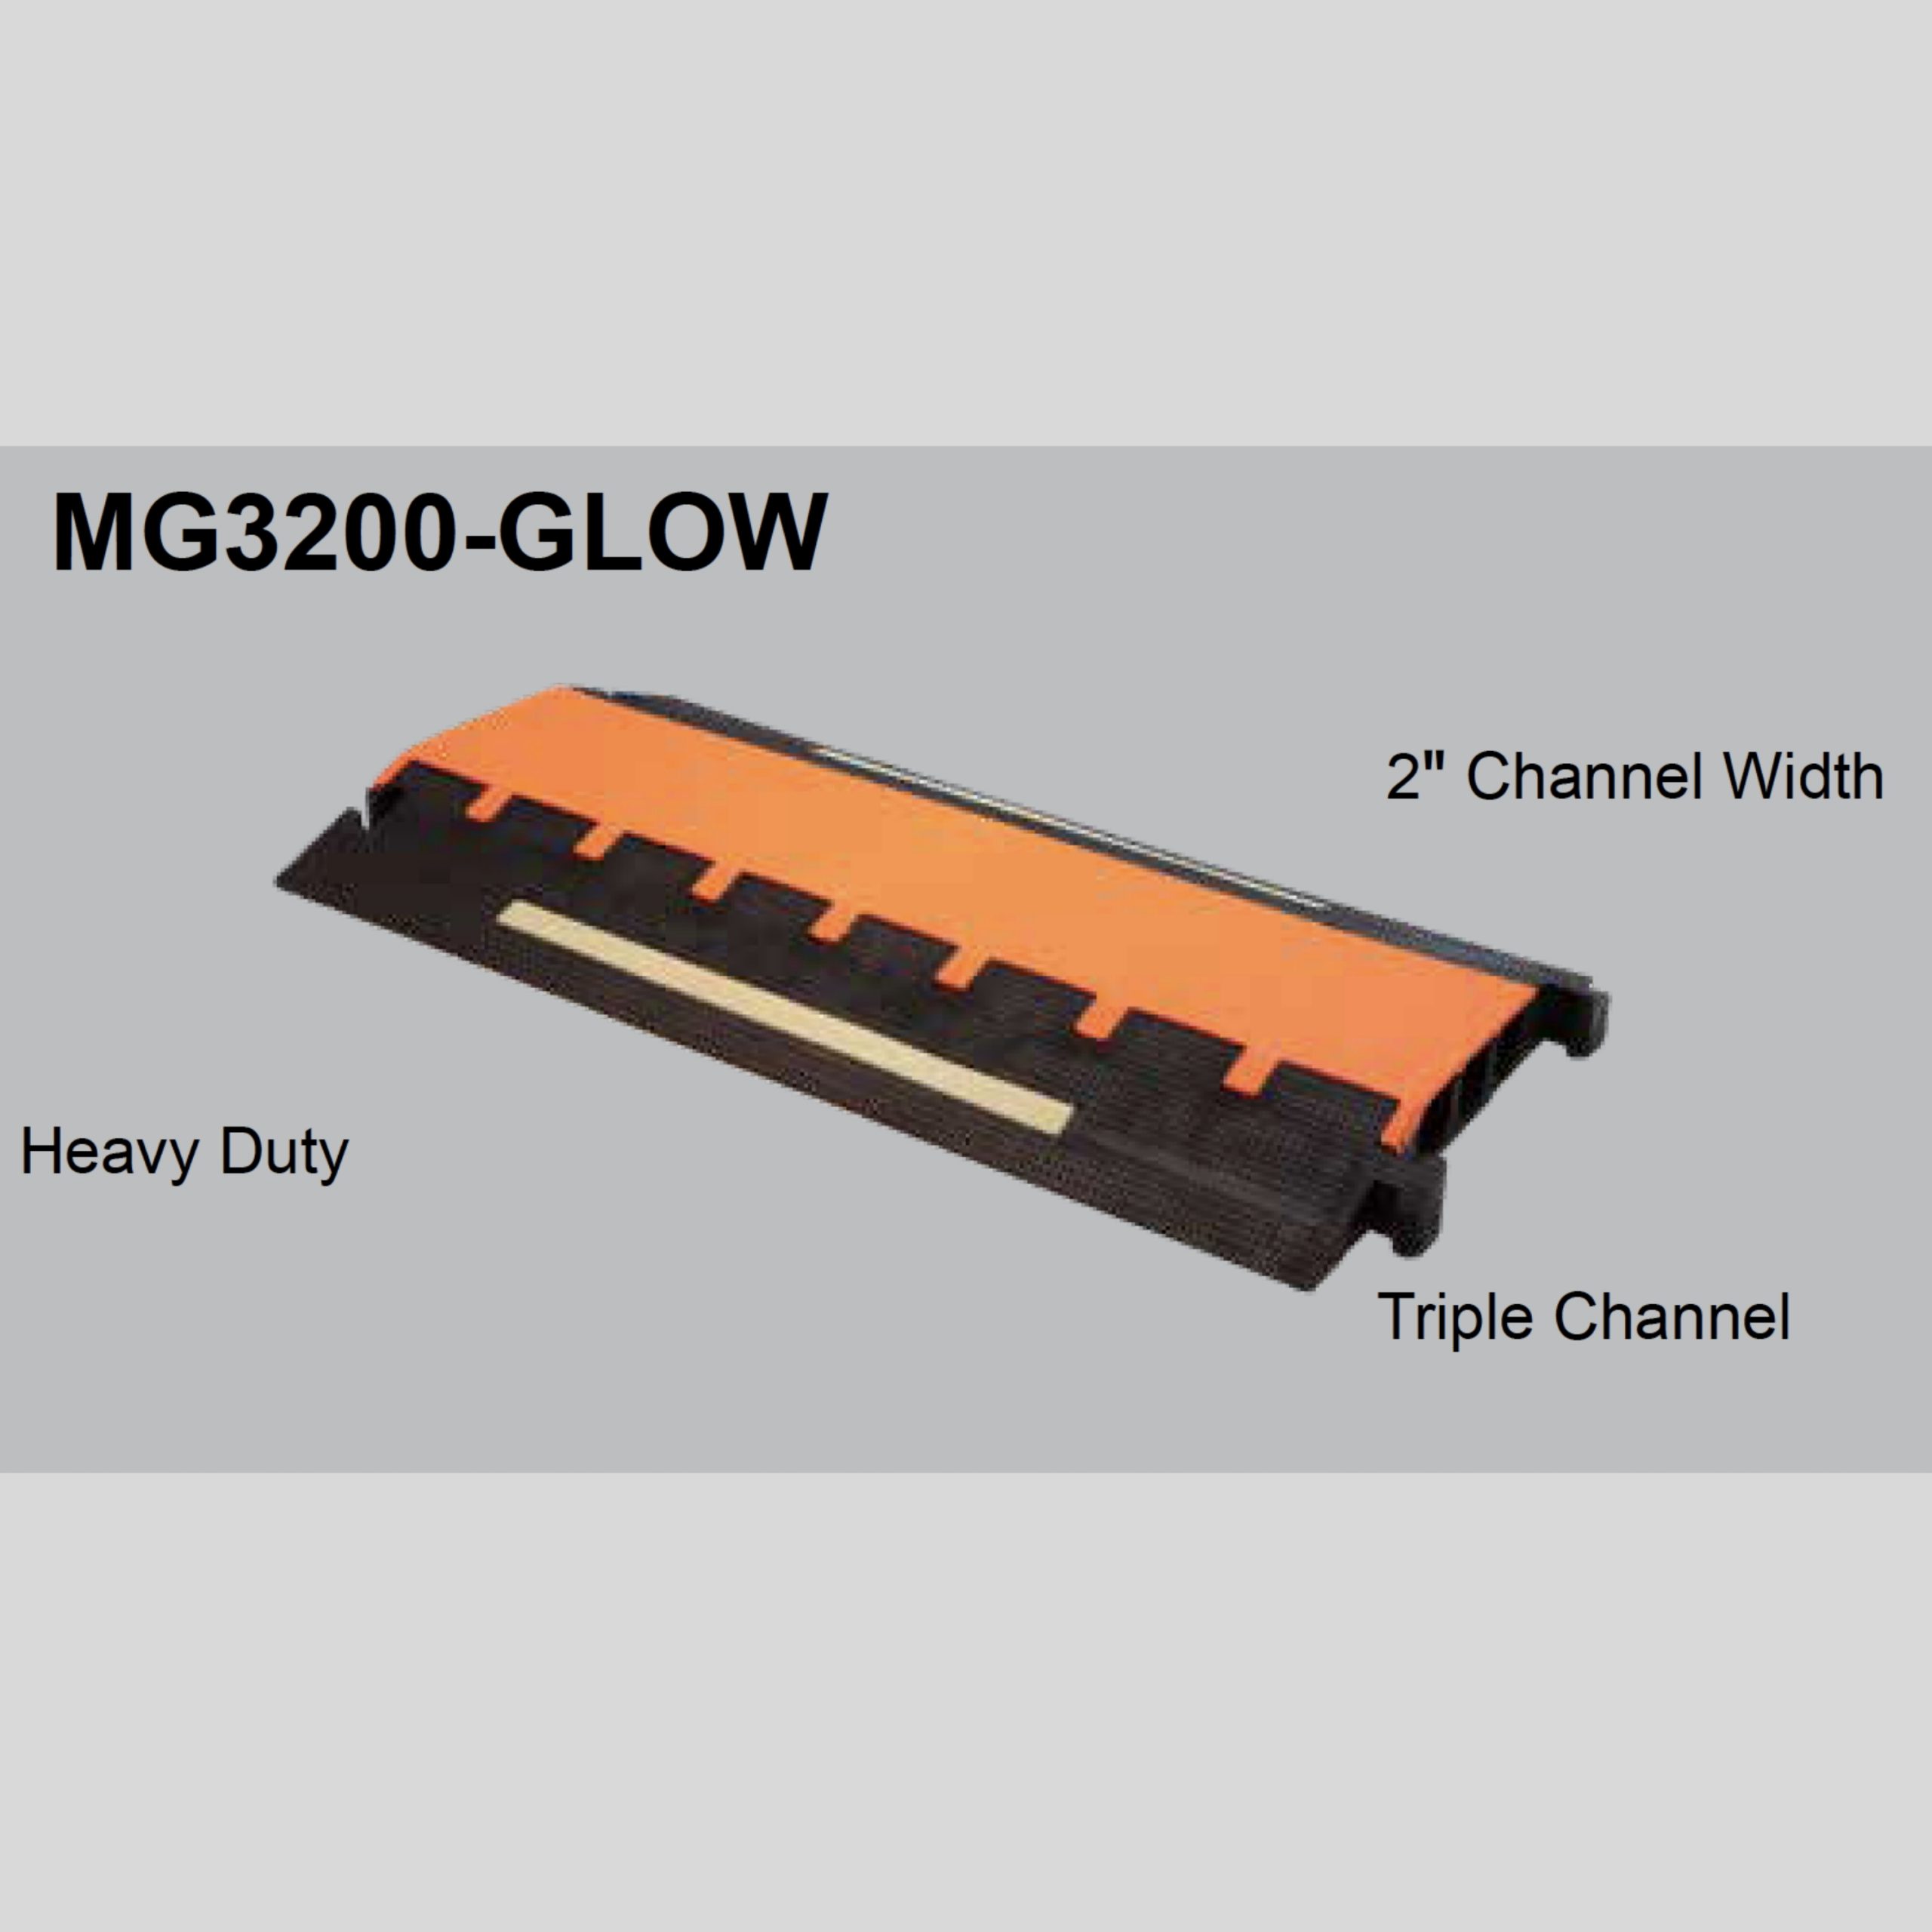 16500 lb Drive Over Wire Protector Orange/Black Three 3 Channels 37 x 16.5 x 2.5 Heavy Duty Elasco MG3300 Mighty Guard Interlocking Cable Ramp Floor Cord Cover per Tire Load Capacity 